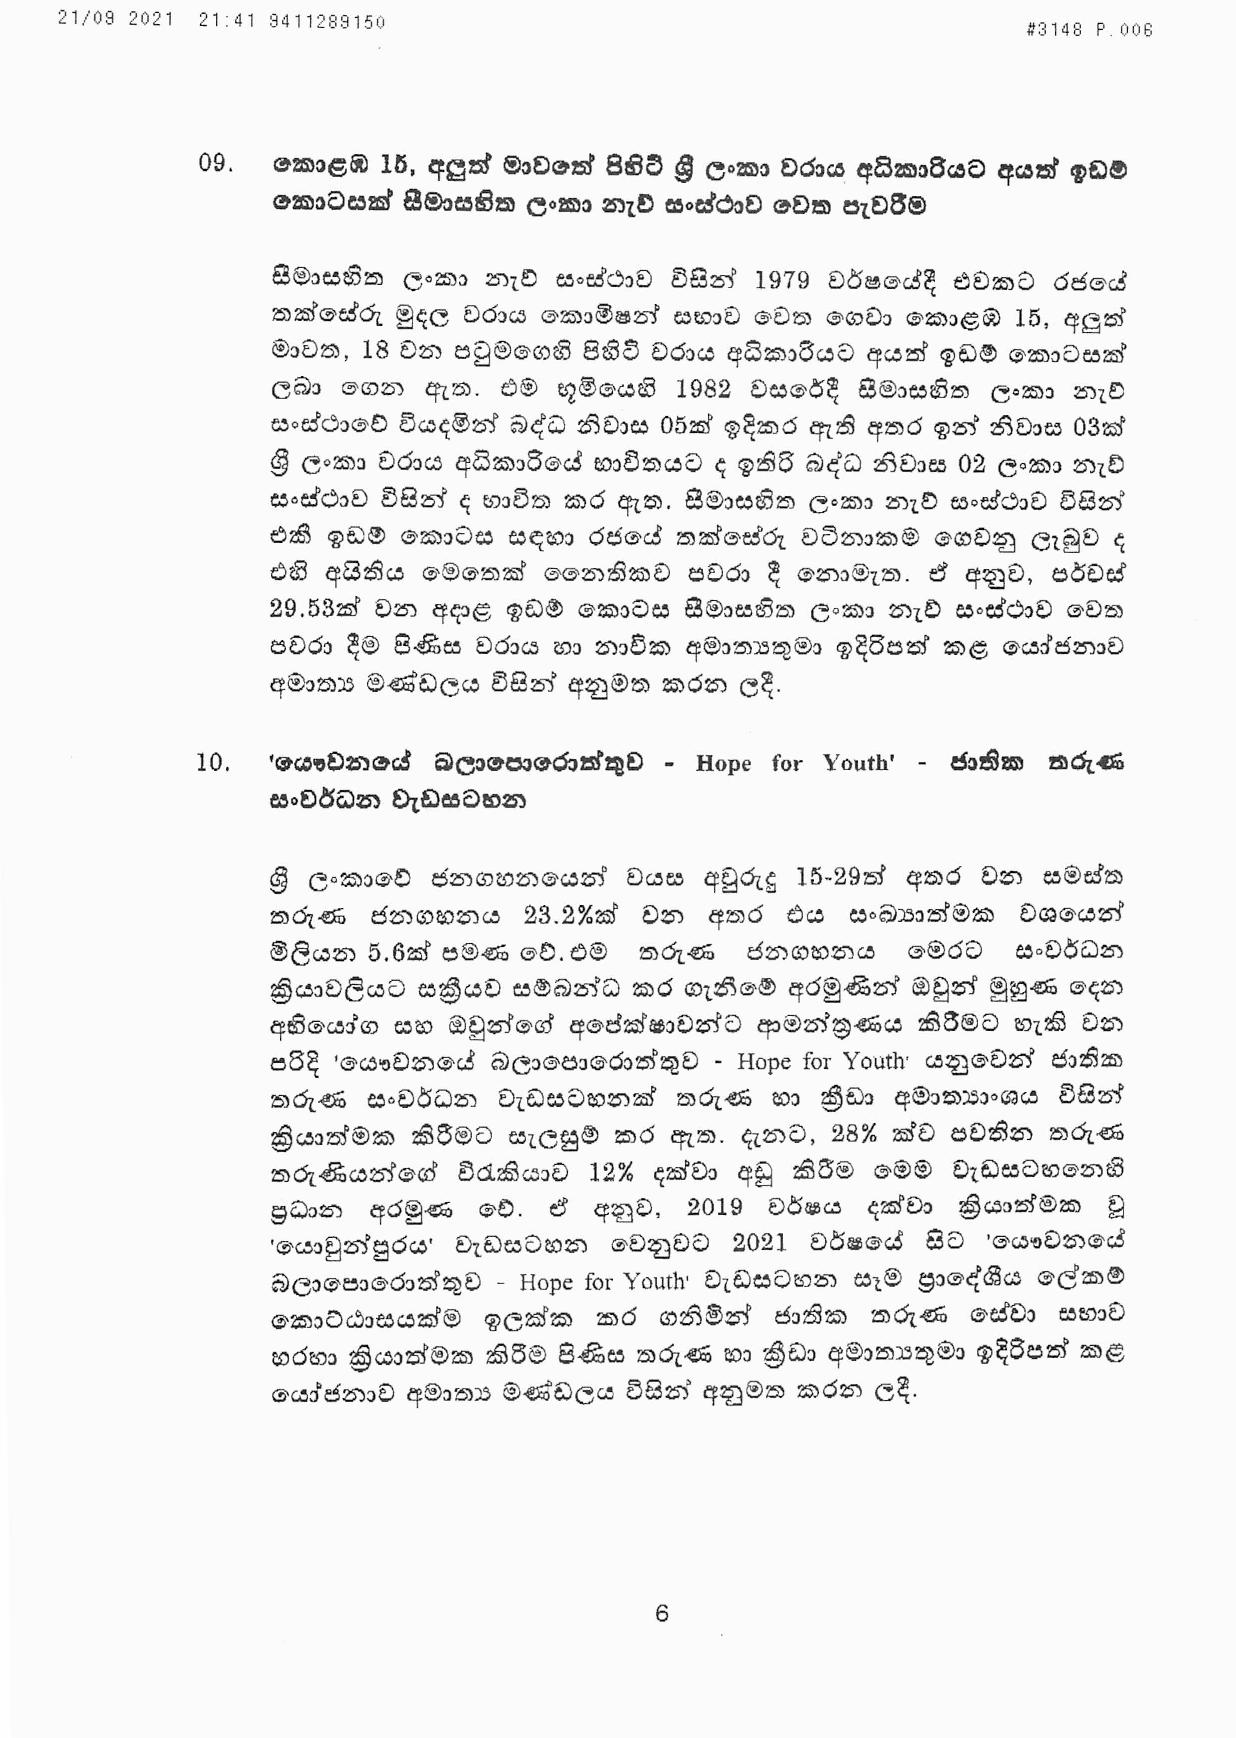 Cabinet Decisions on 21.09.2021 page 006